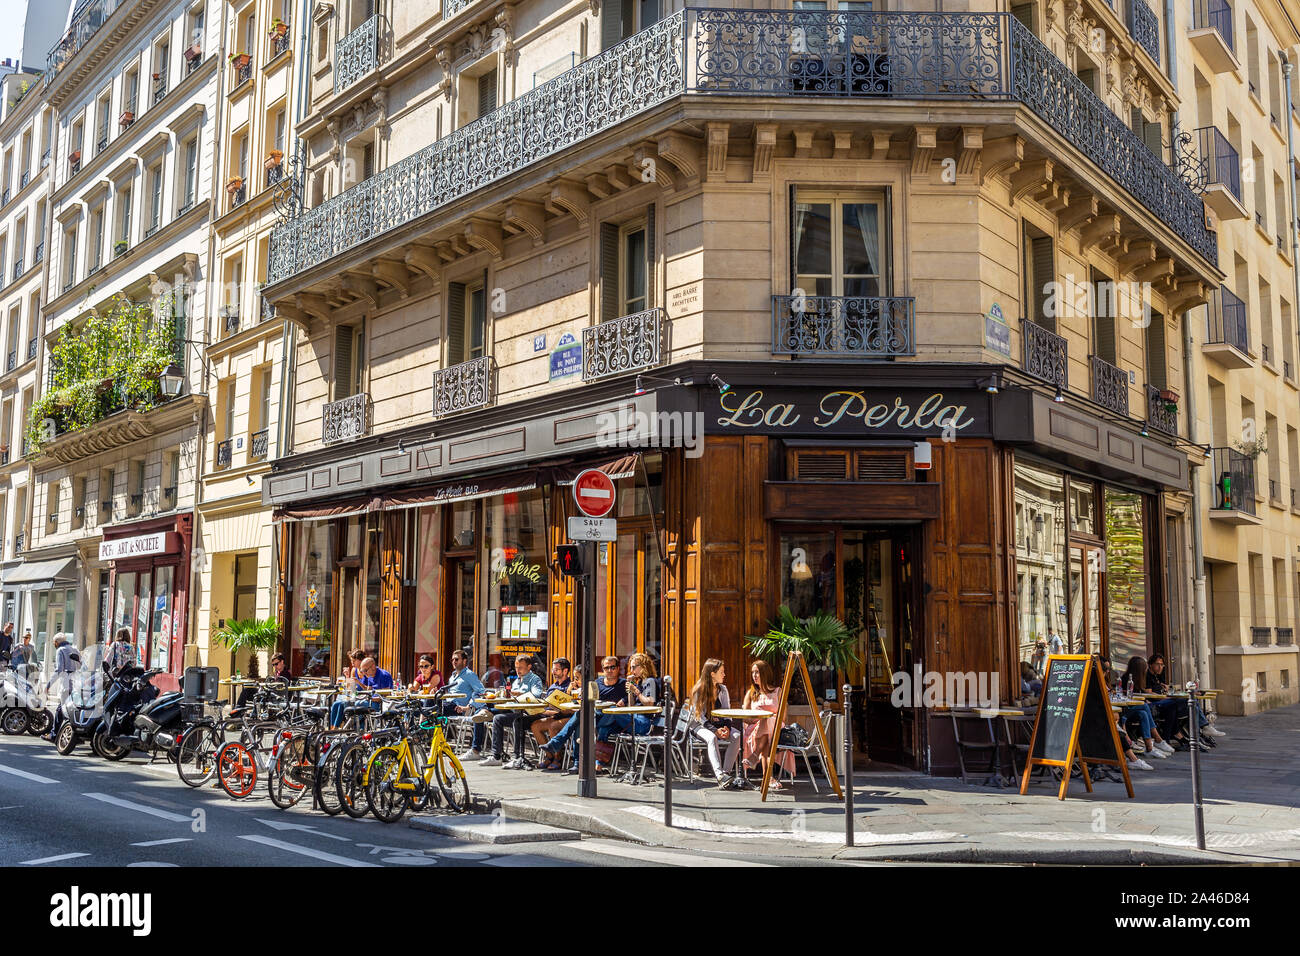 Paris, France - September 2, 2018: Street scene at Paris depicting the Bistro La Perla with some people at their table Stock Photo